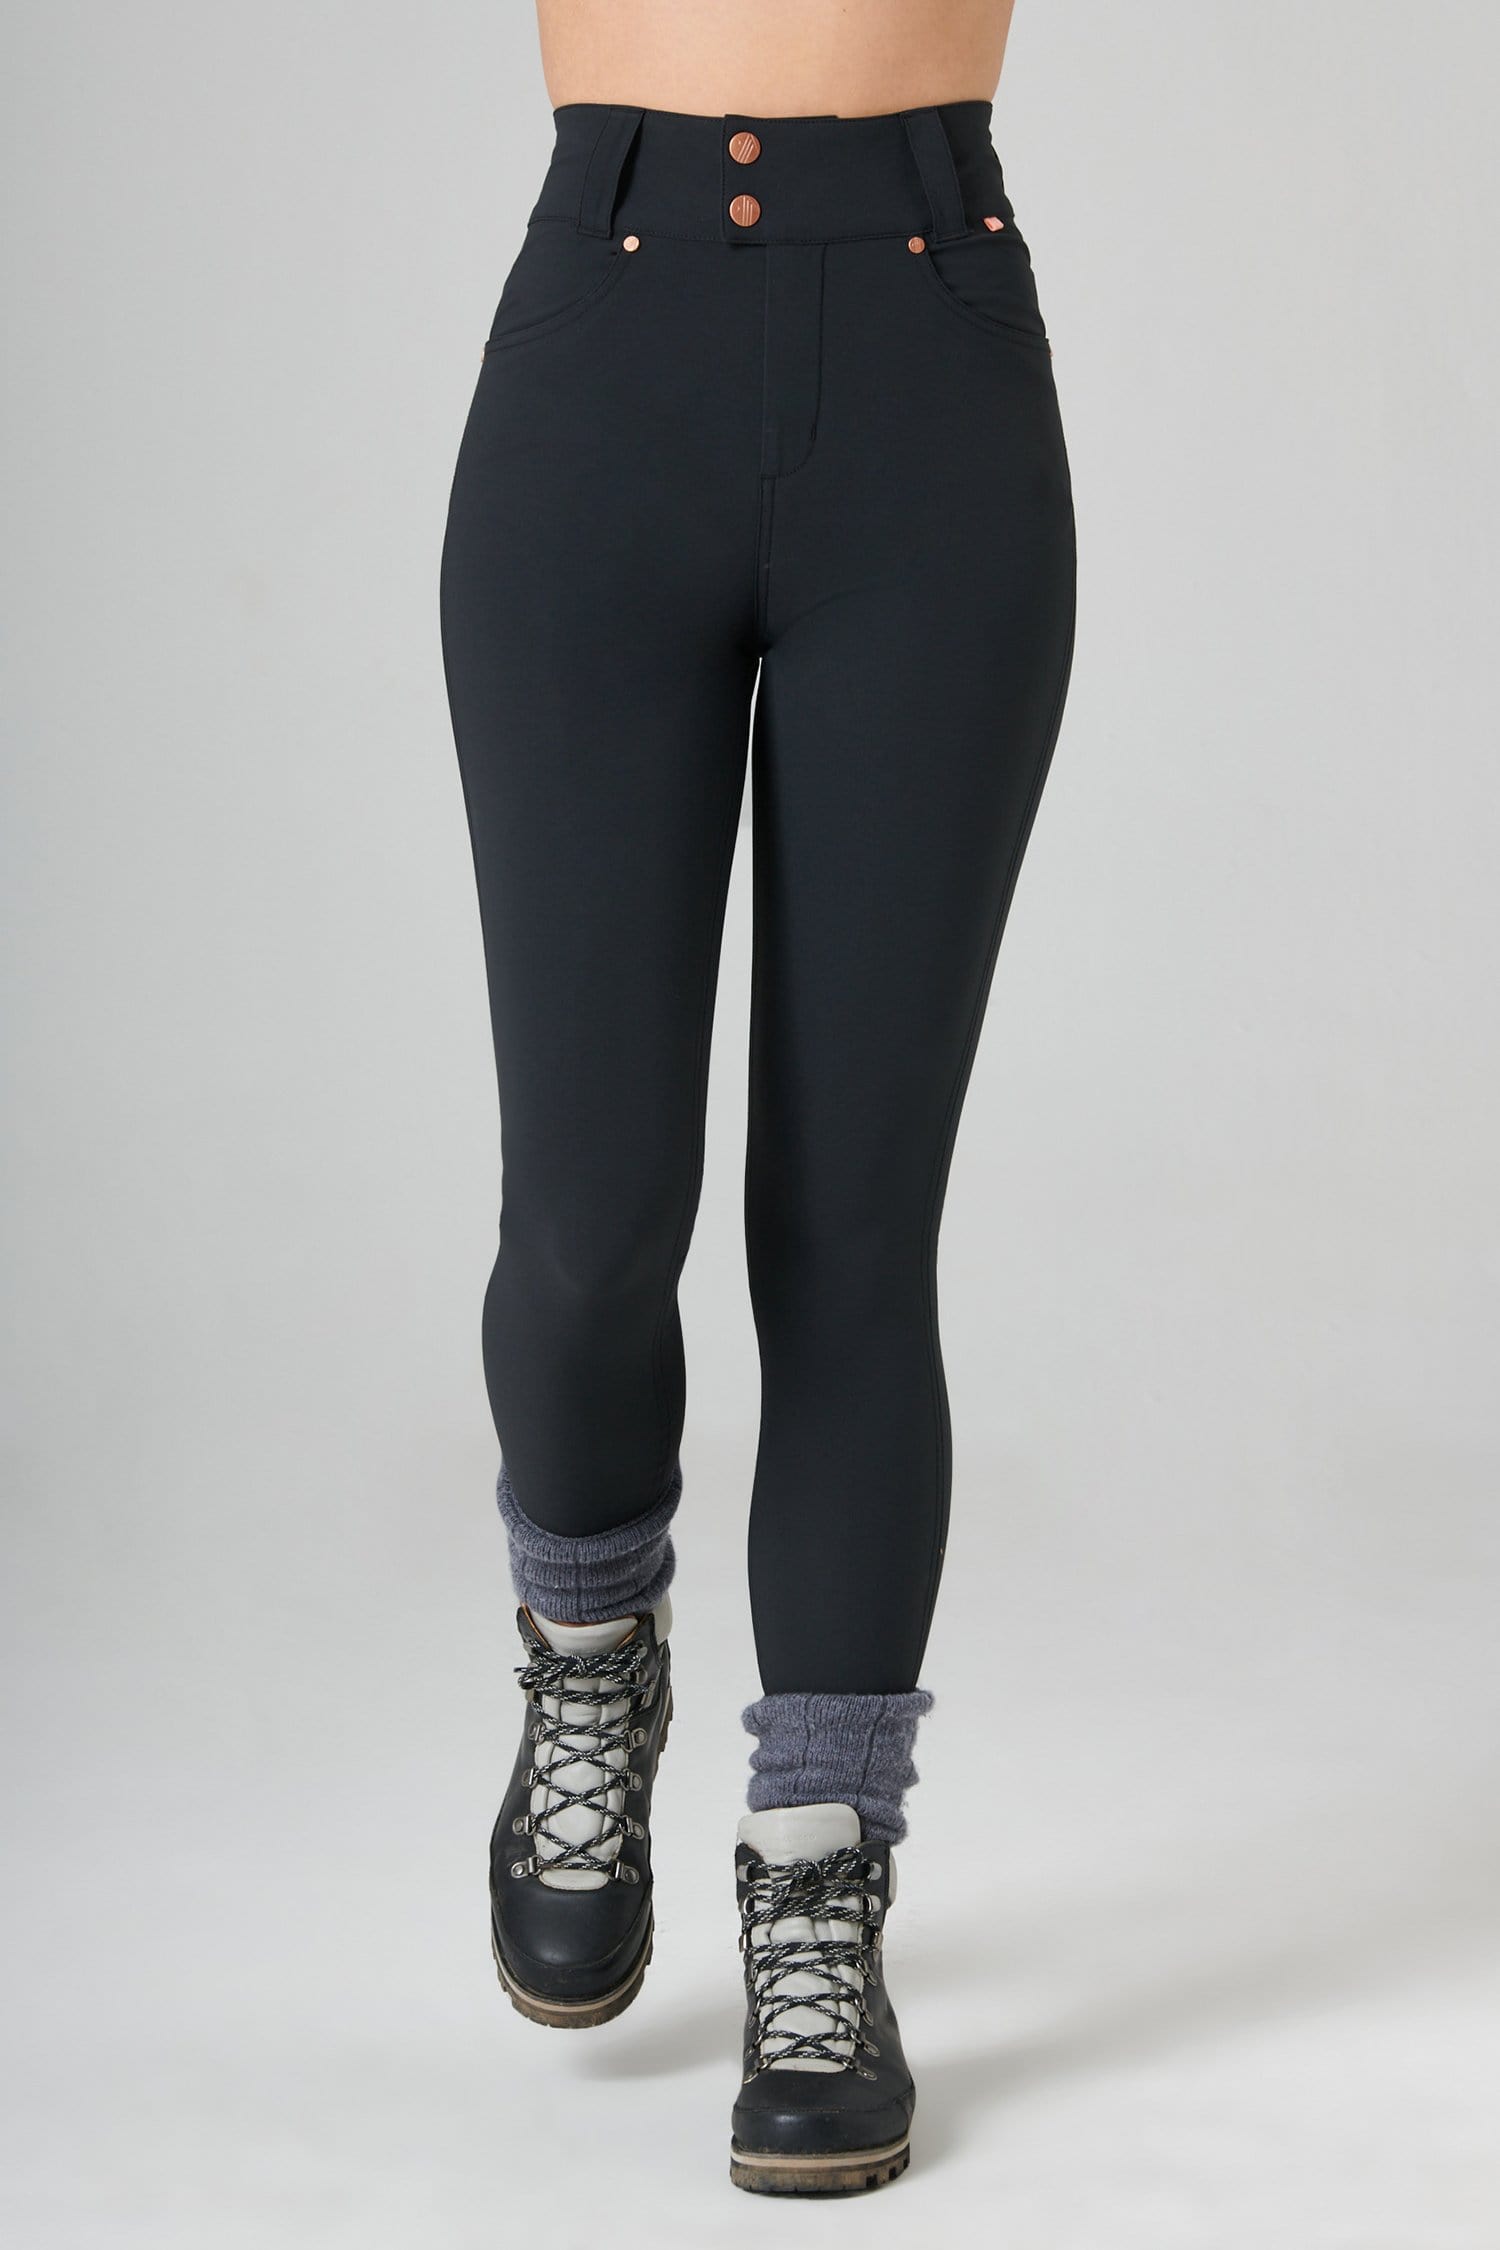 The Shape Skinny Outdoor Trousers - Black - 28r / Uk10 - Womens - Acai Outdoorwear